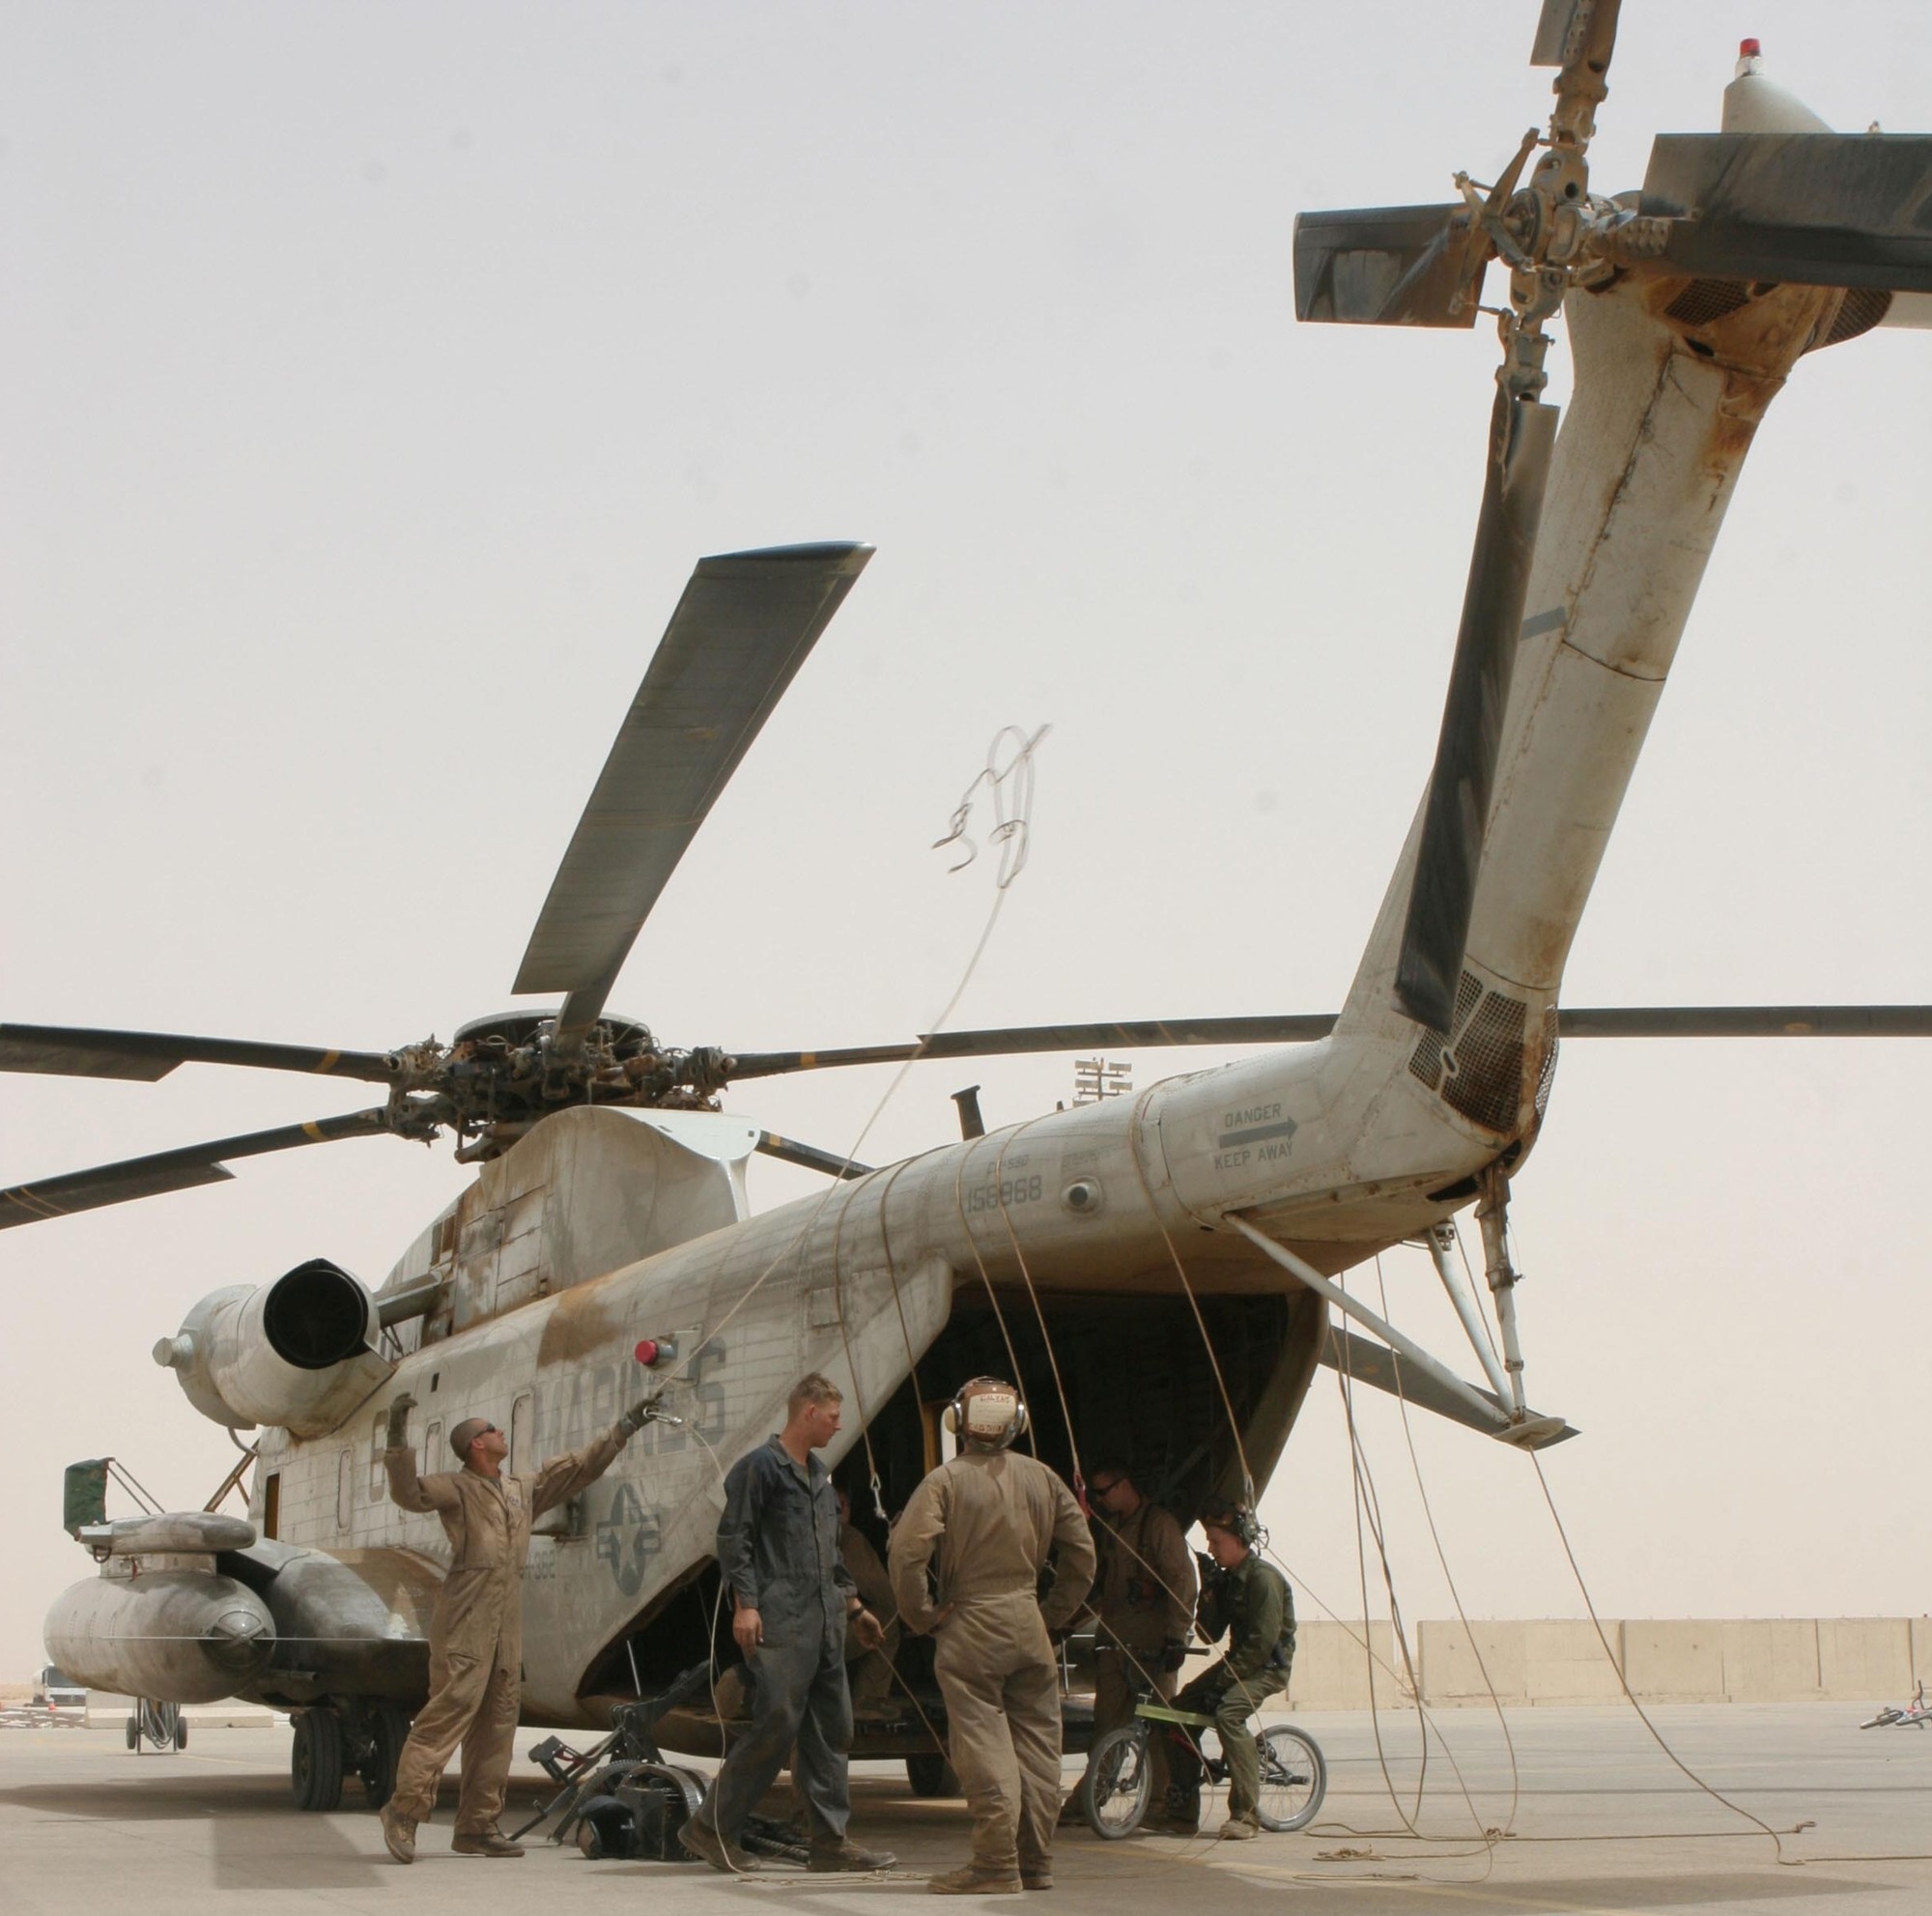 hmh-362 ugly angels marine heavy helicopter squadron usmc sikorsky ch-53d sea stallion 26